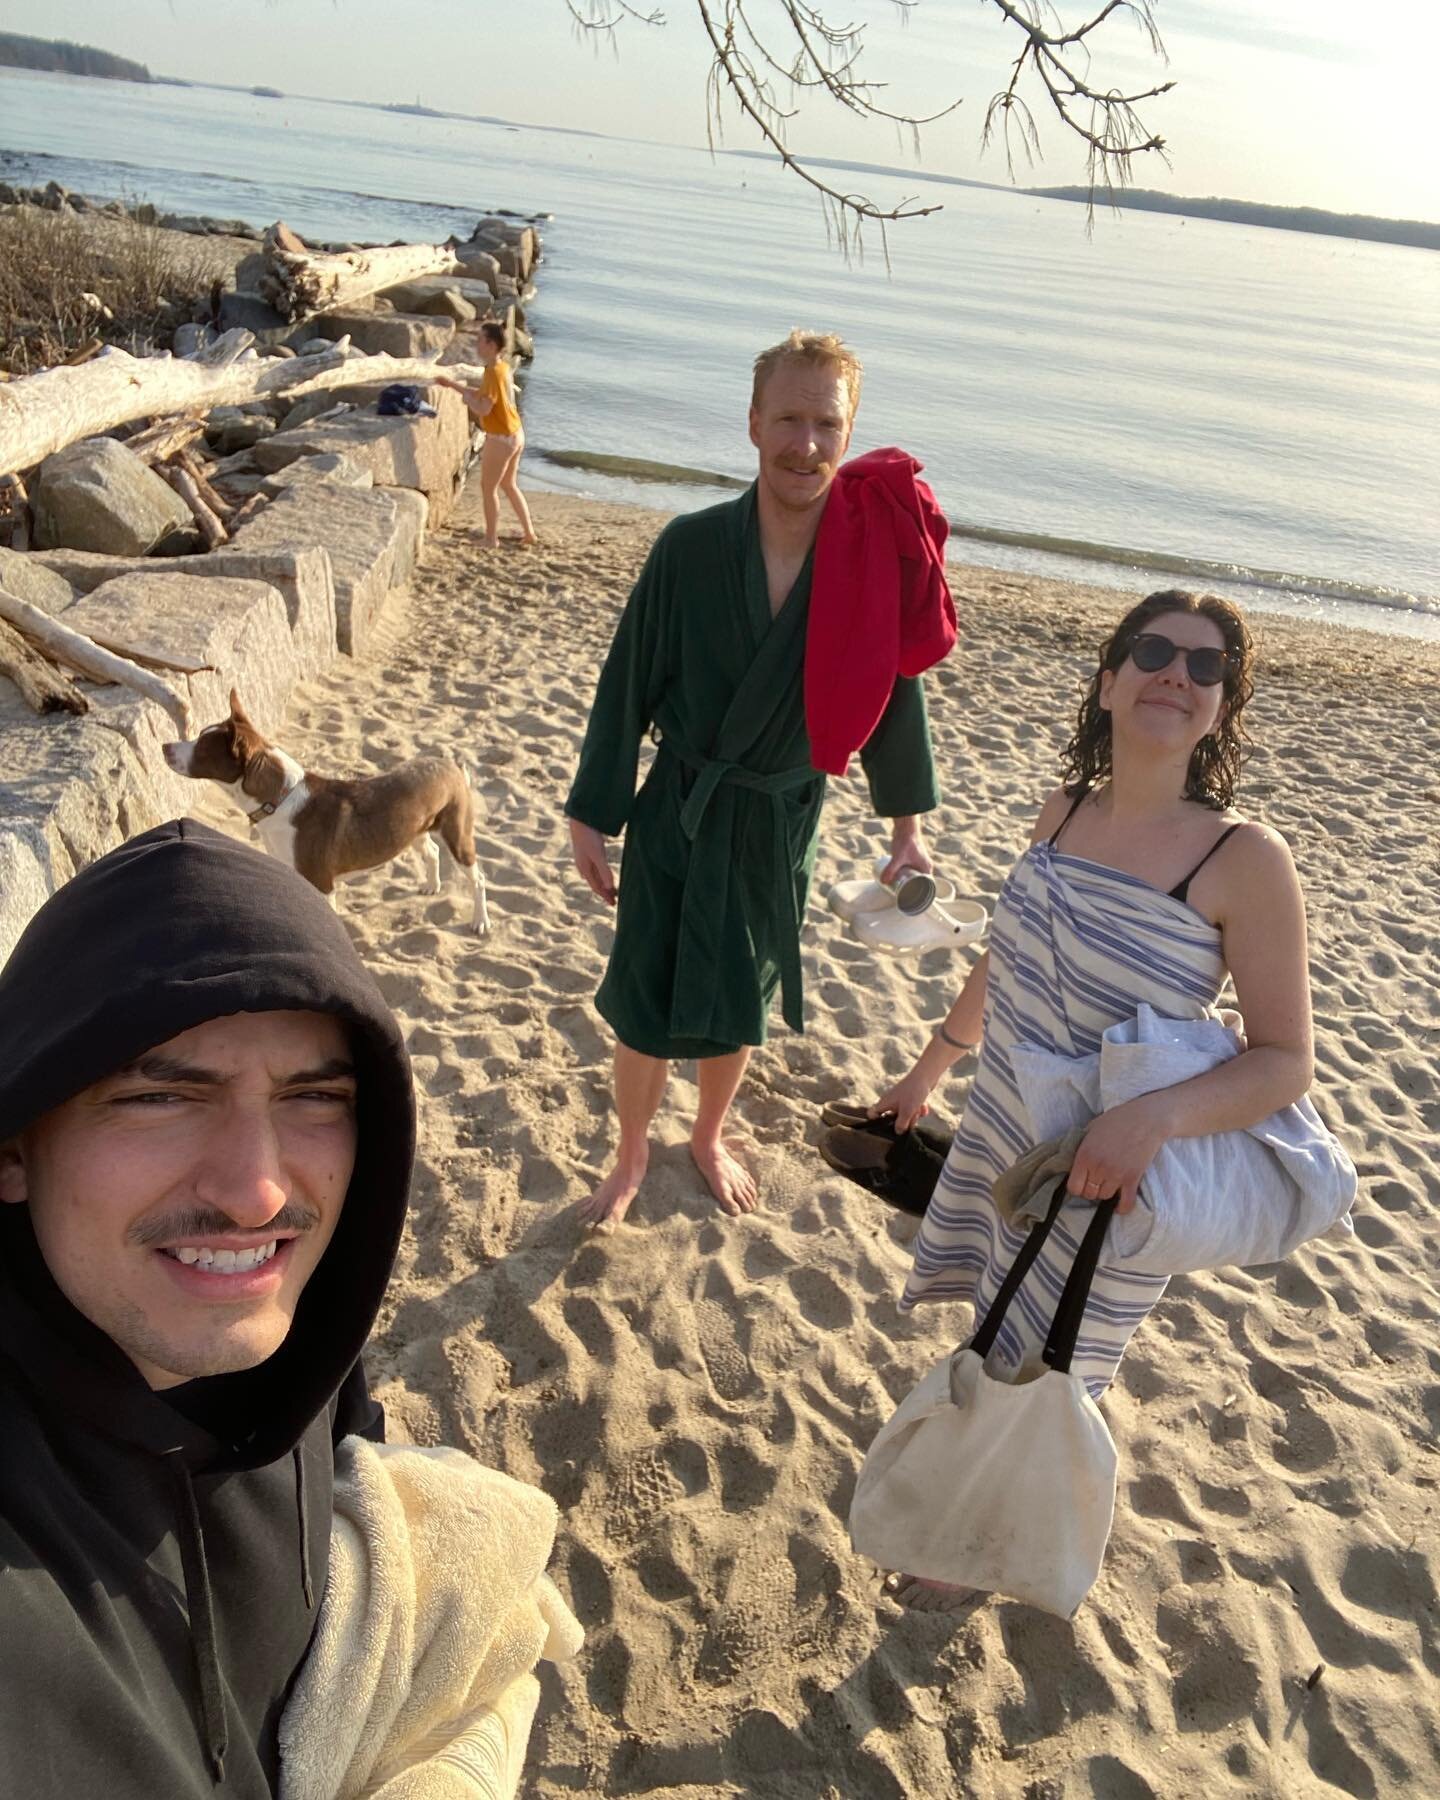 4.14.23

The weather app put out a severe weather alert for a &ldquo;beach hazard&rdquo; today - warning people not to get fooled by the warm air and think the water is warm too. We can confirm, the water is definitely not warm. Exactly how we like i